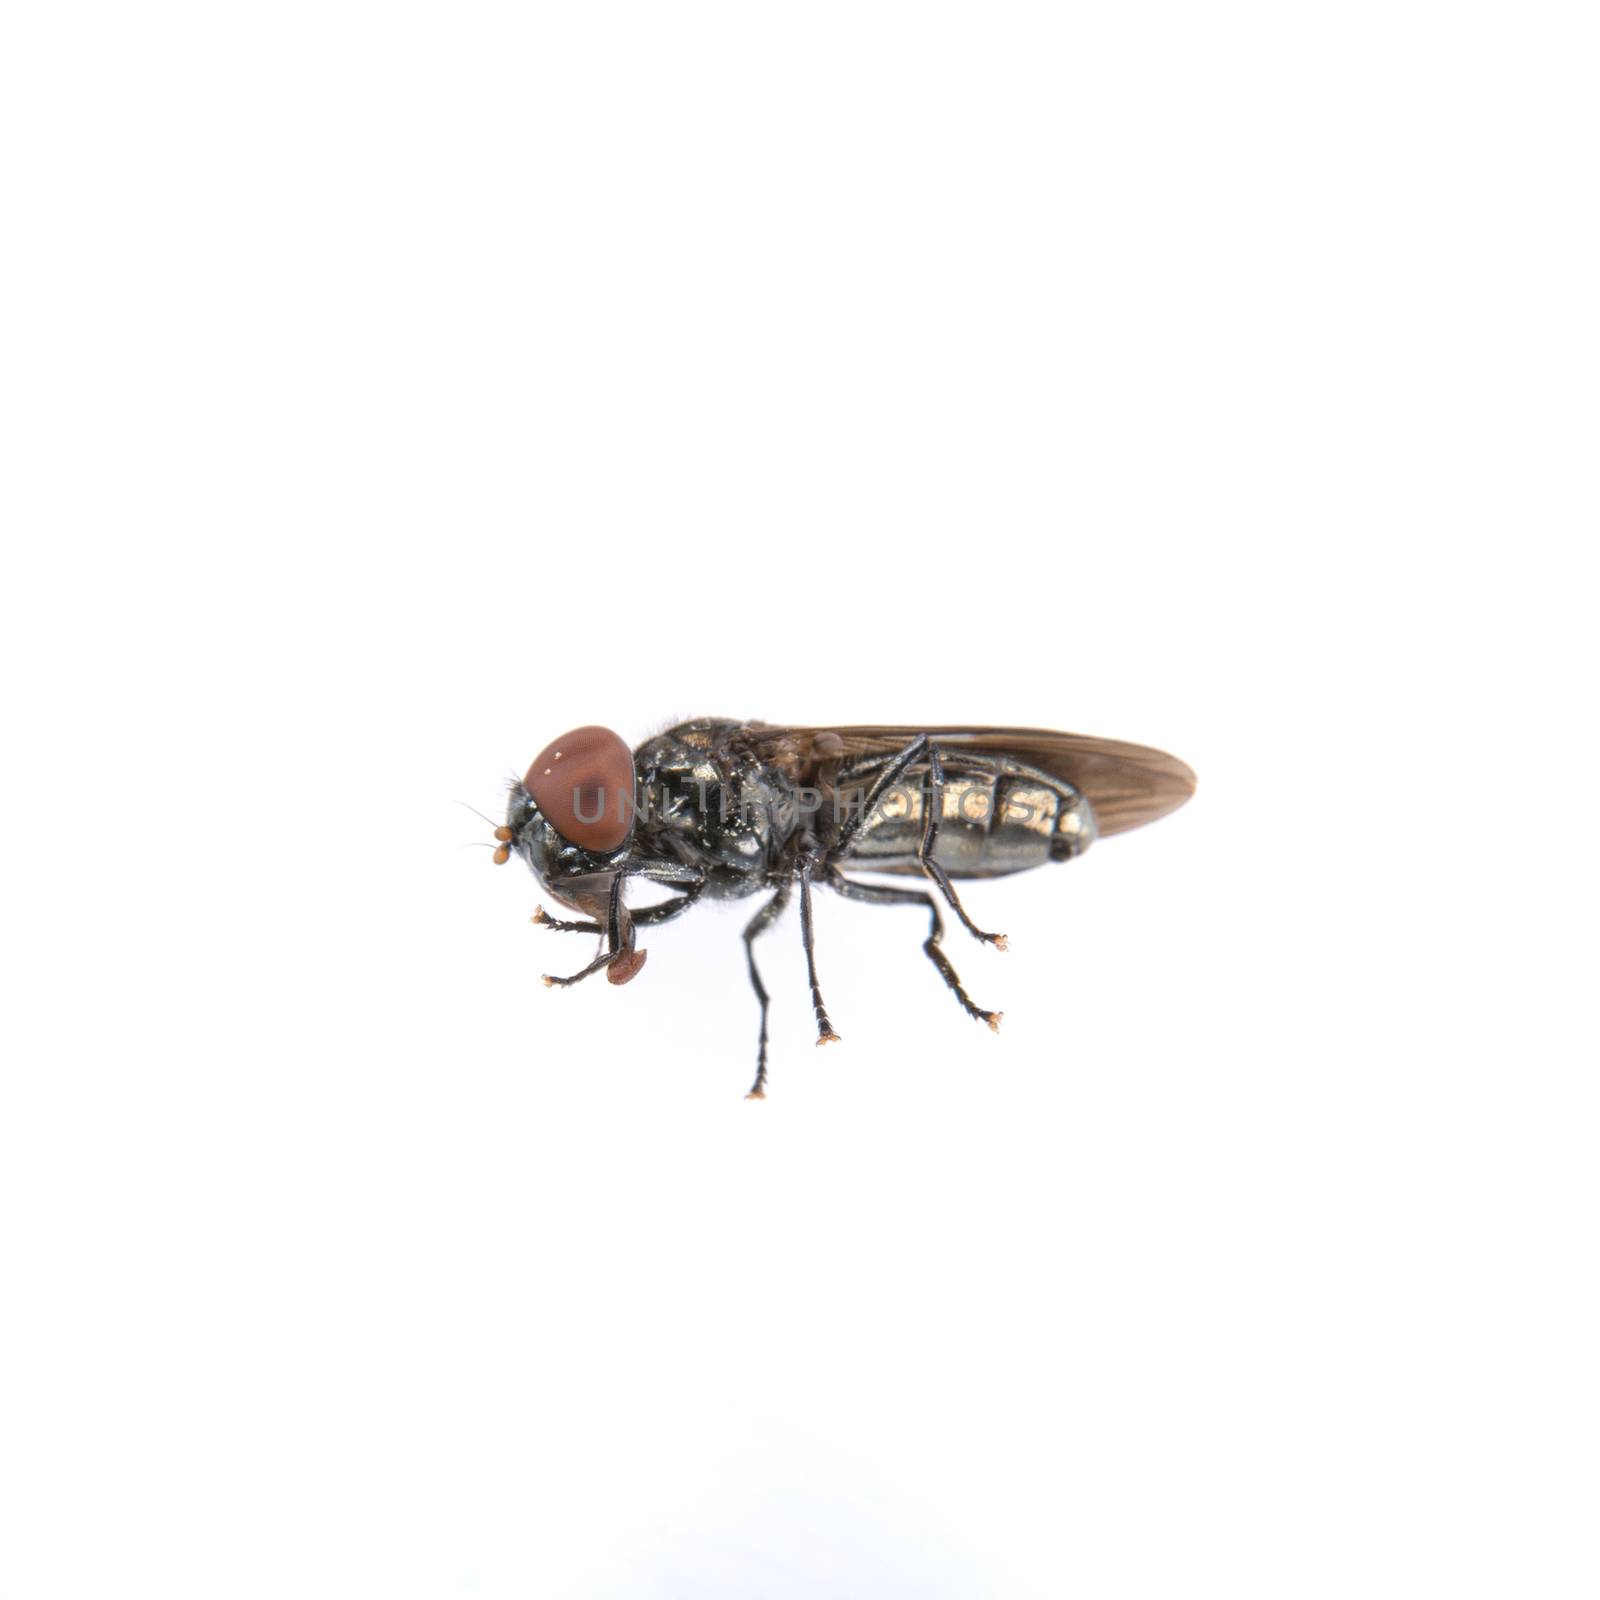 Black fly isolated on a white background